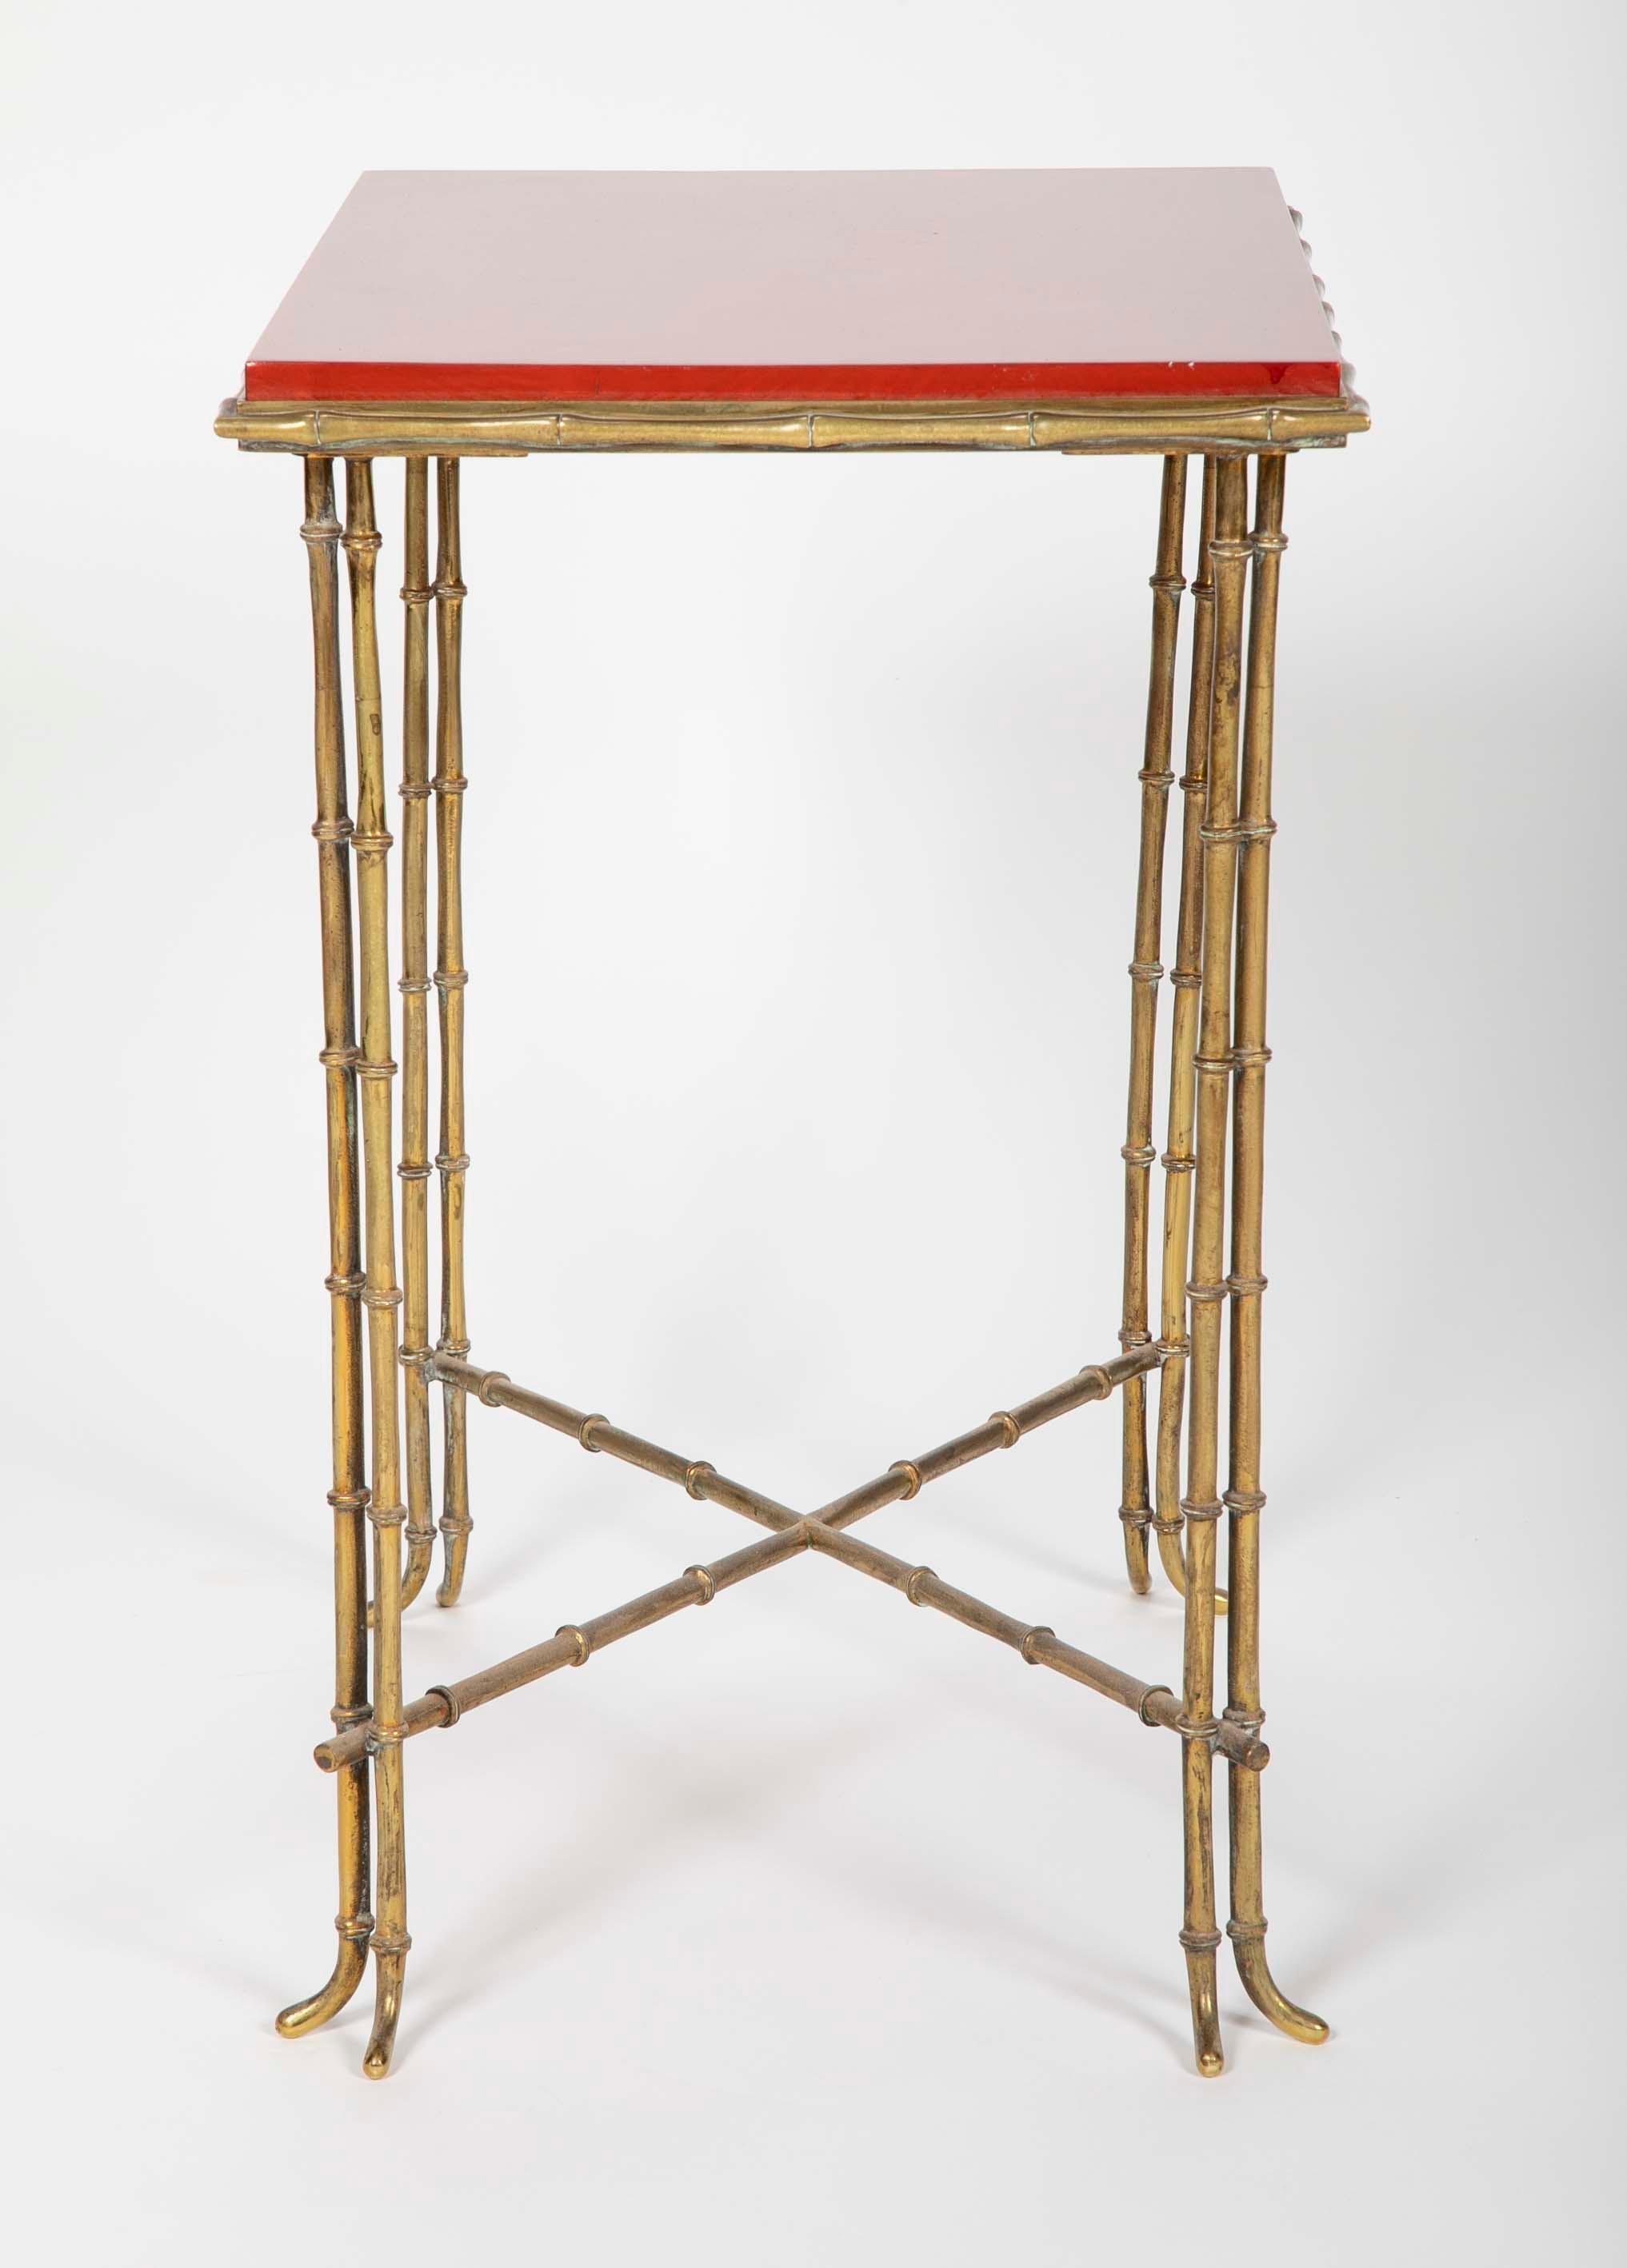 Brass Bamboo Form Cocktail Table by Bagues with Red Lacquered Wood Top 2